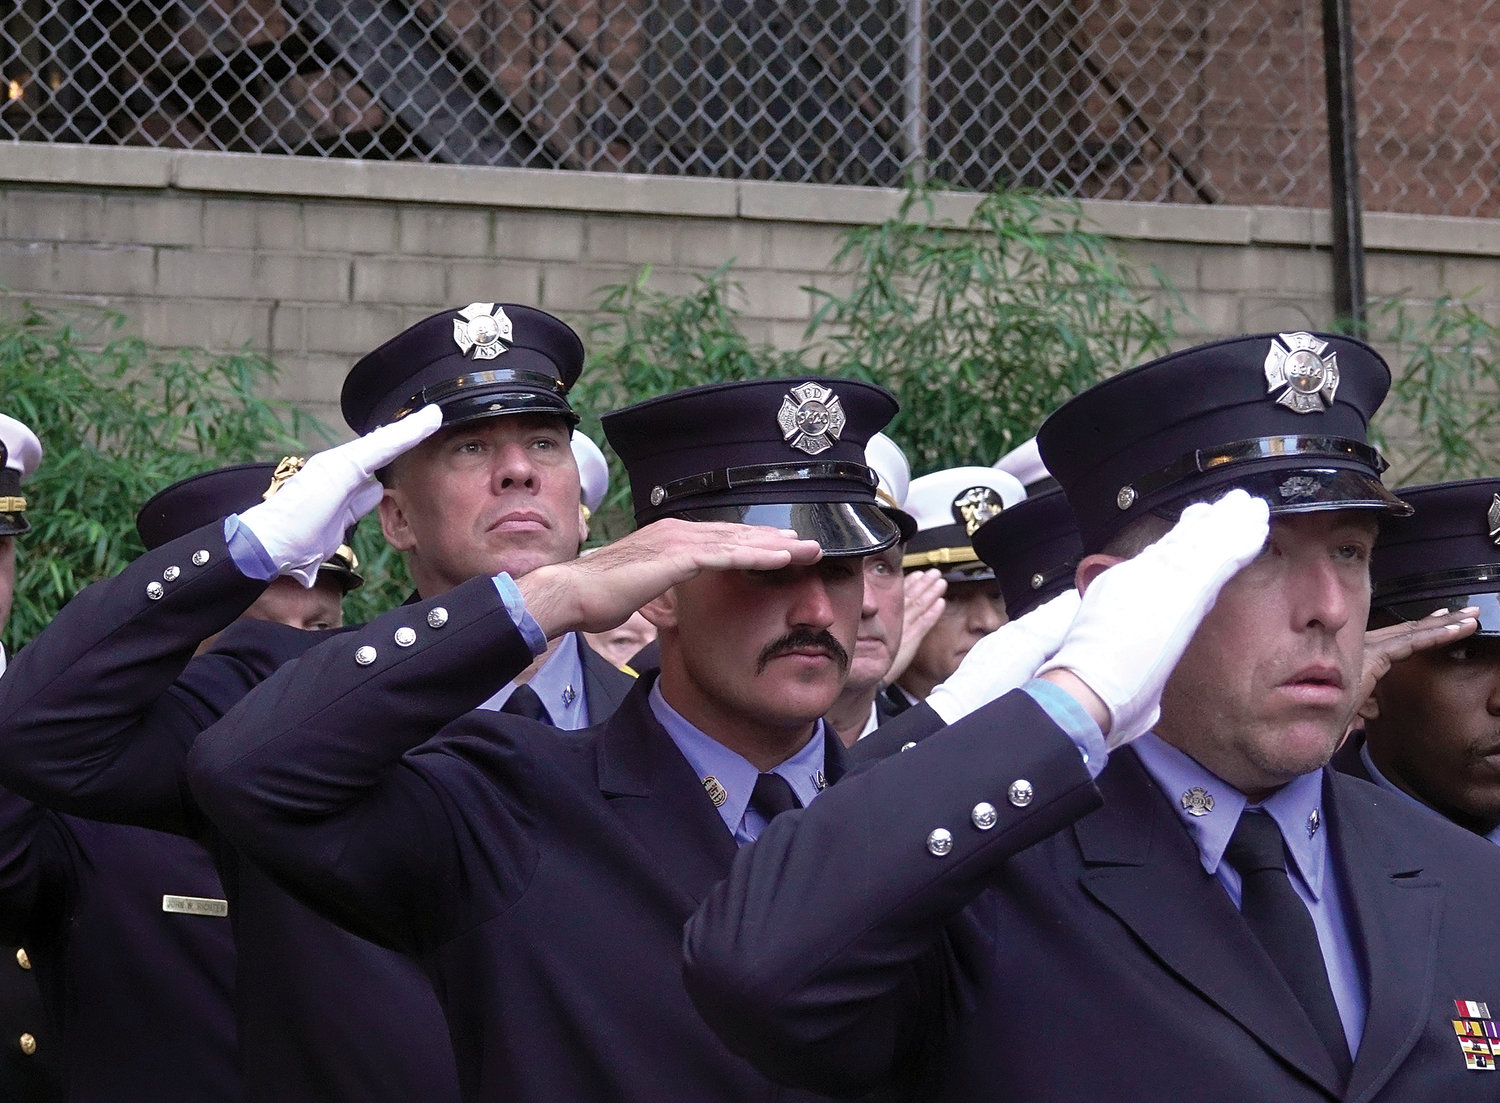 Firefighters offer a salute during the outdoor memorial service Sept. 11 at Firefighters Memorial Park in Manhattan. Cardinal Dolan administered a blessing.